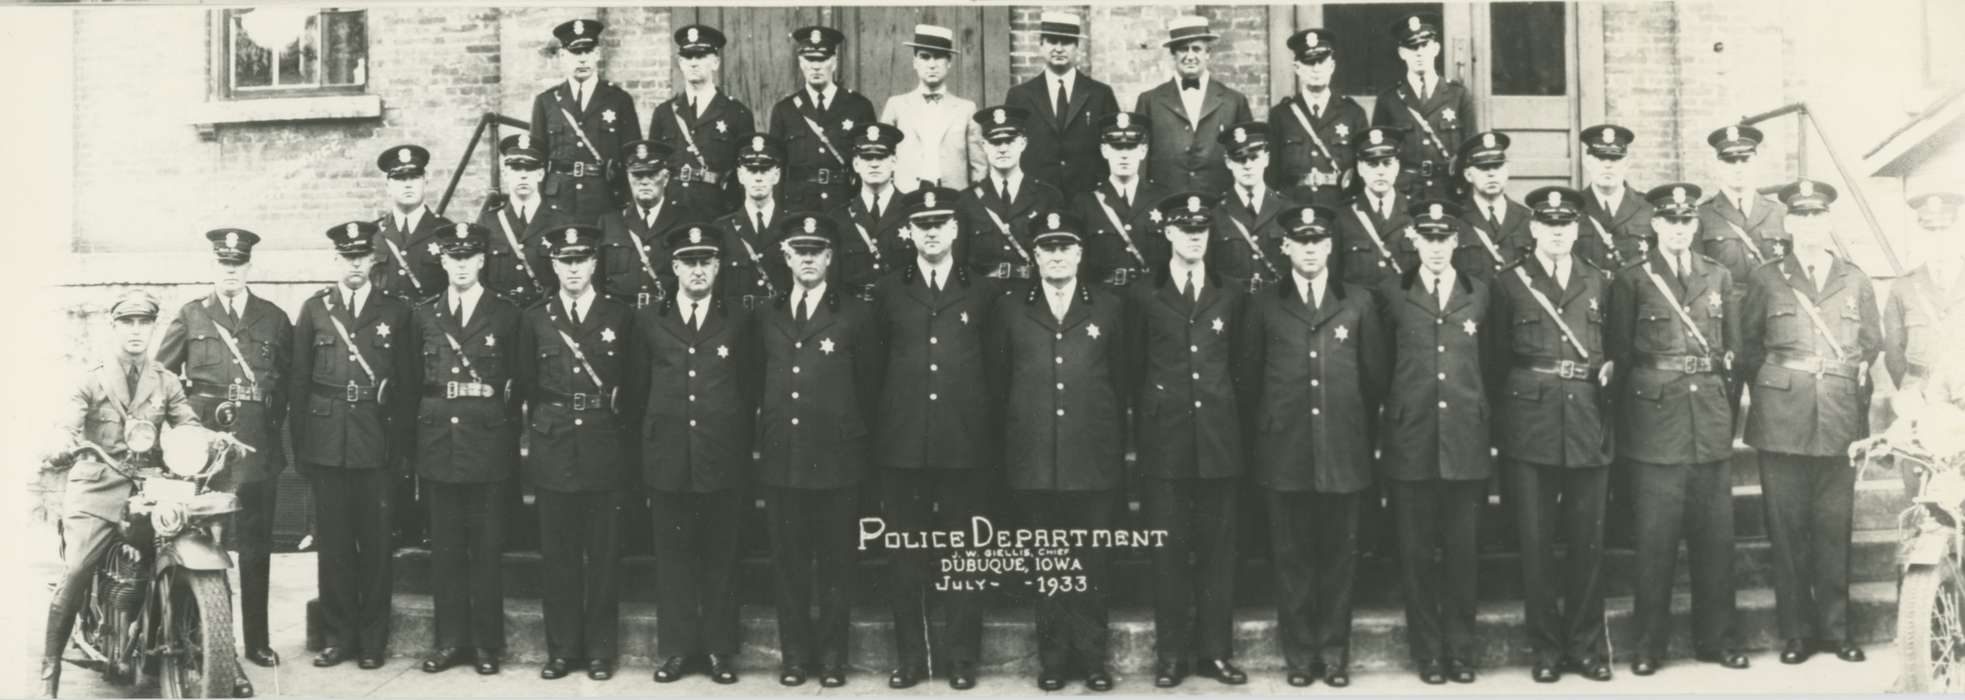 Dubuque, IA, Whitfield, Carla & Richard, Iowa, Iowa History, police, Cities and Towns, uniform, motorcycle, Portraits - Group, Labor and Occupations, history of Iowa